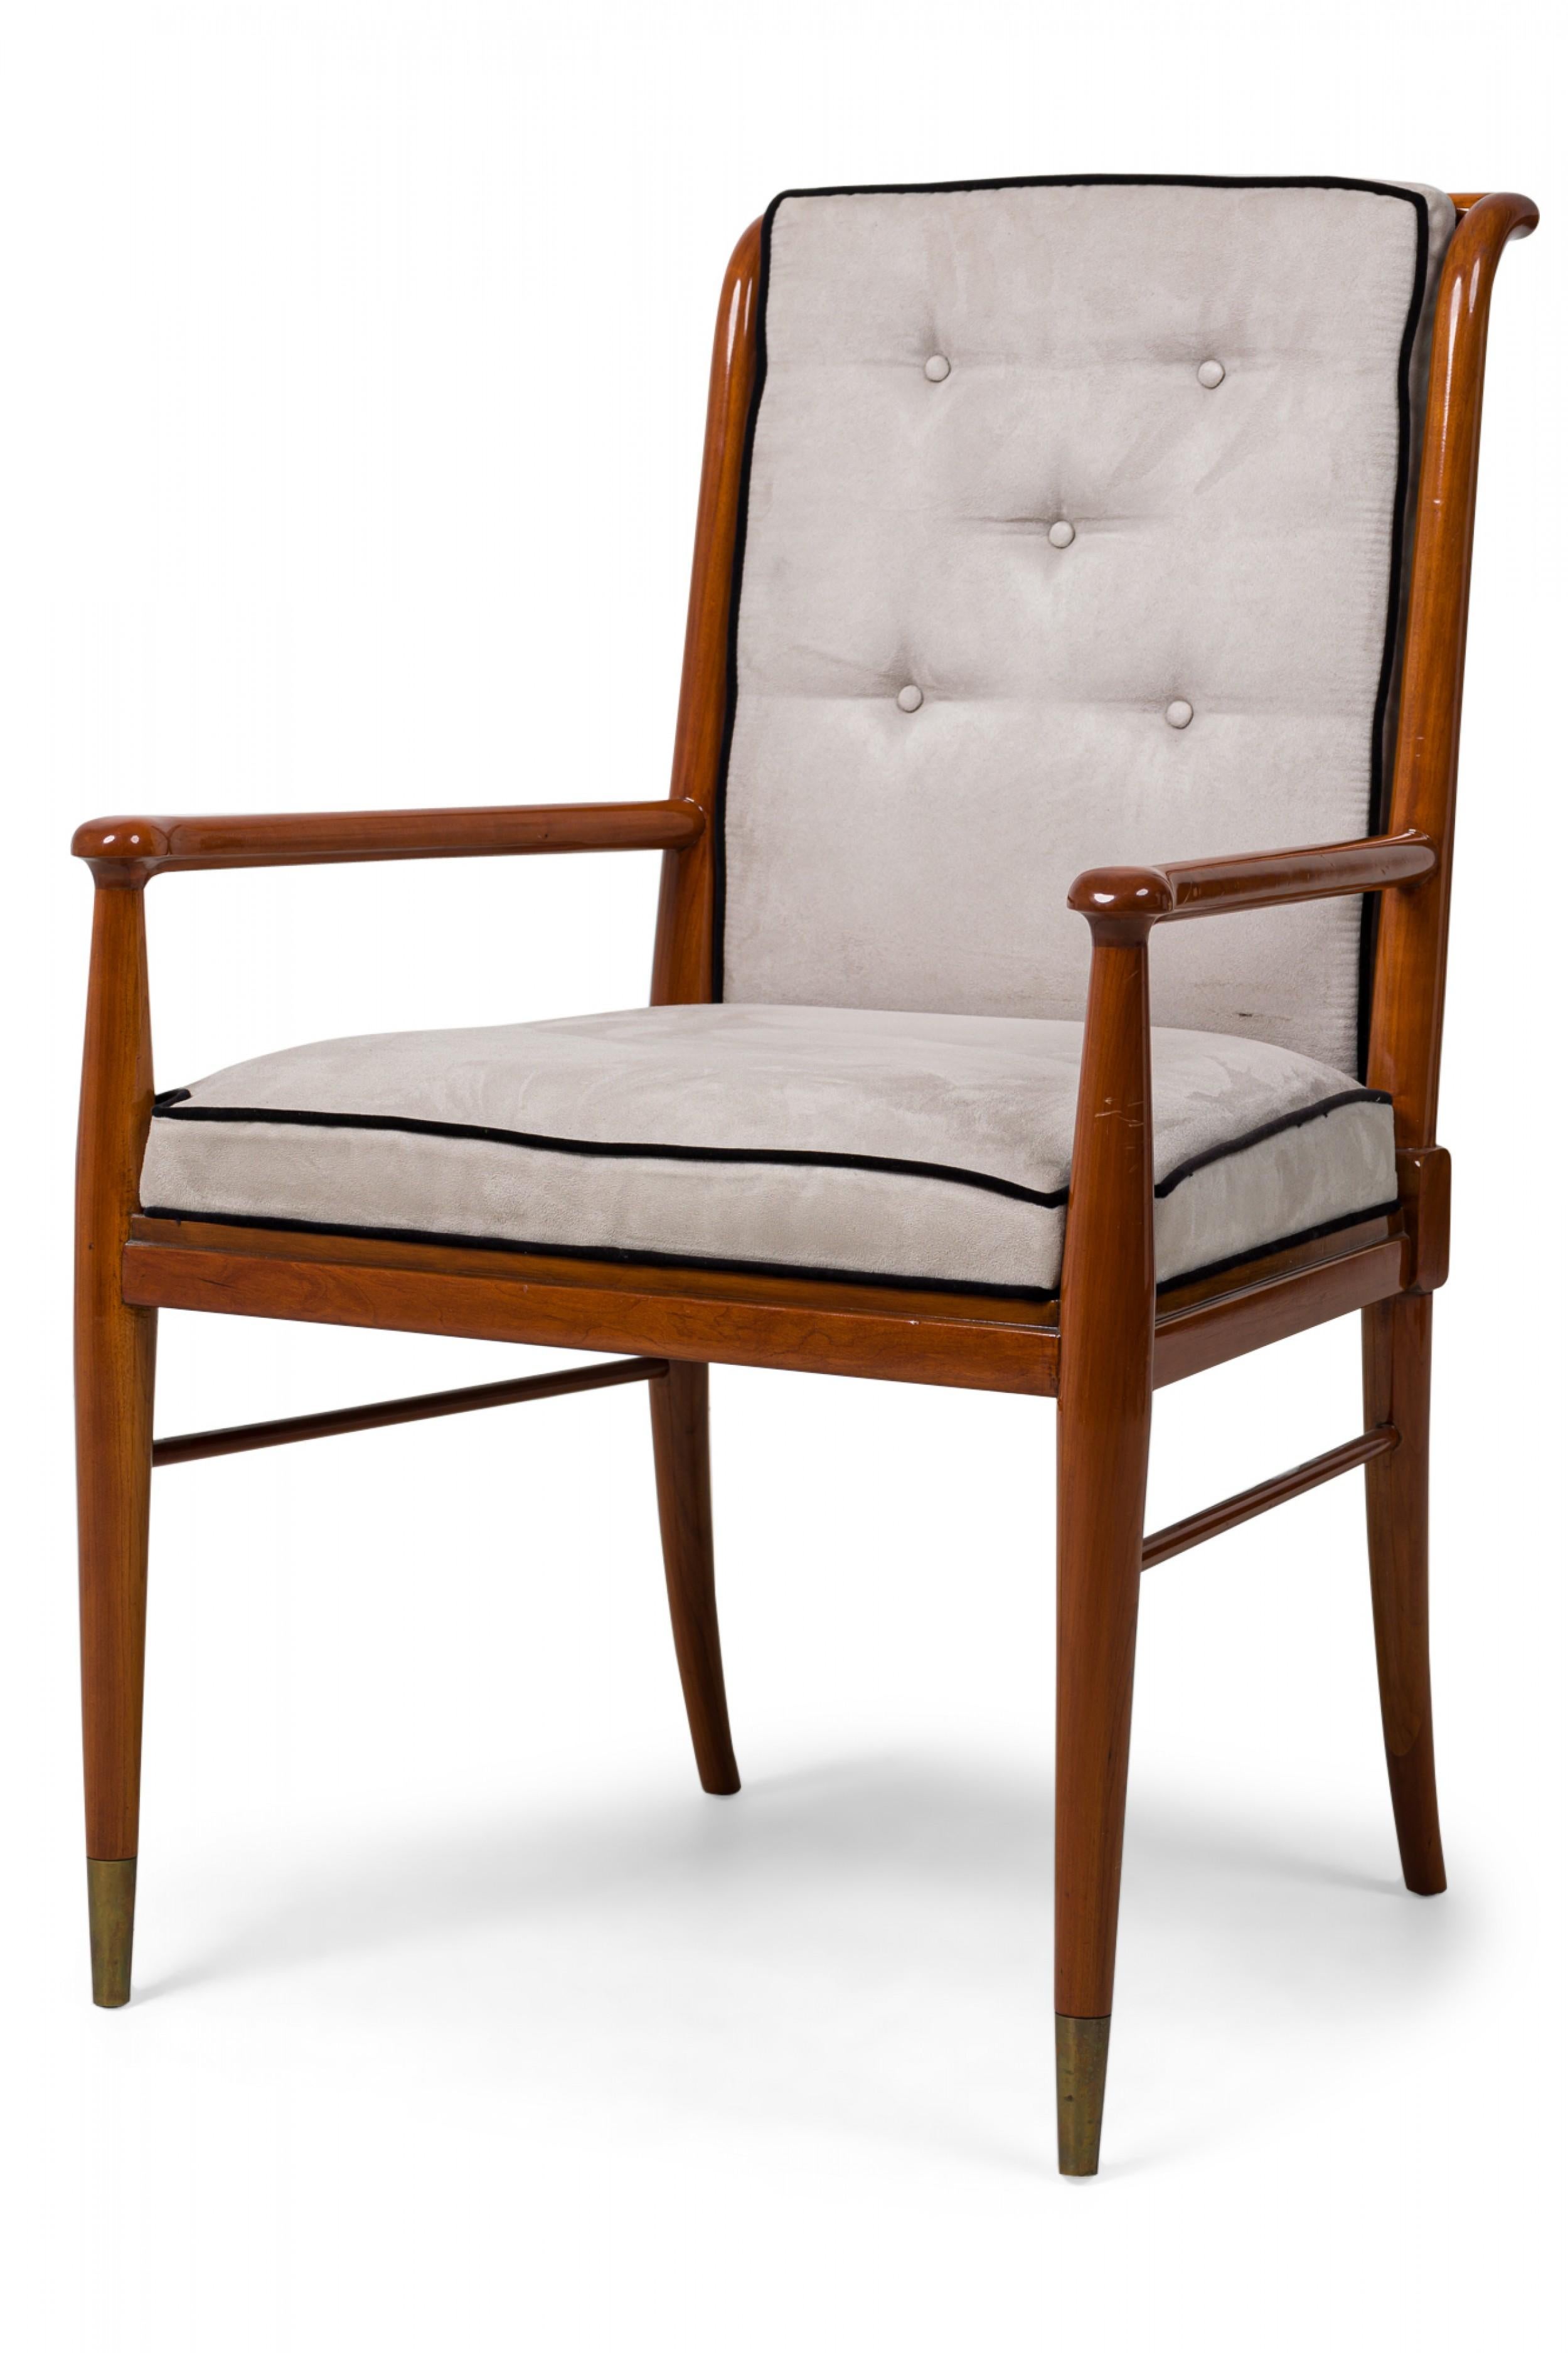 Mid-Century American (1950s) walnut armchair featuring a curved back with 5 pierced slats on sabre back legs, gray suede upholstered back and seat, button tufted with black piping, plus 2 horizontal stretchers and brass sabots on the front legs.